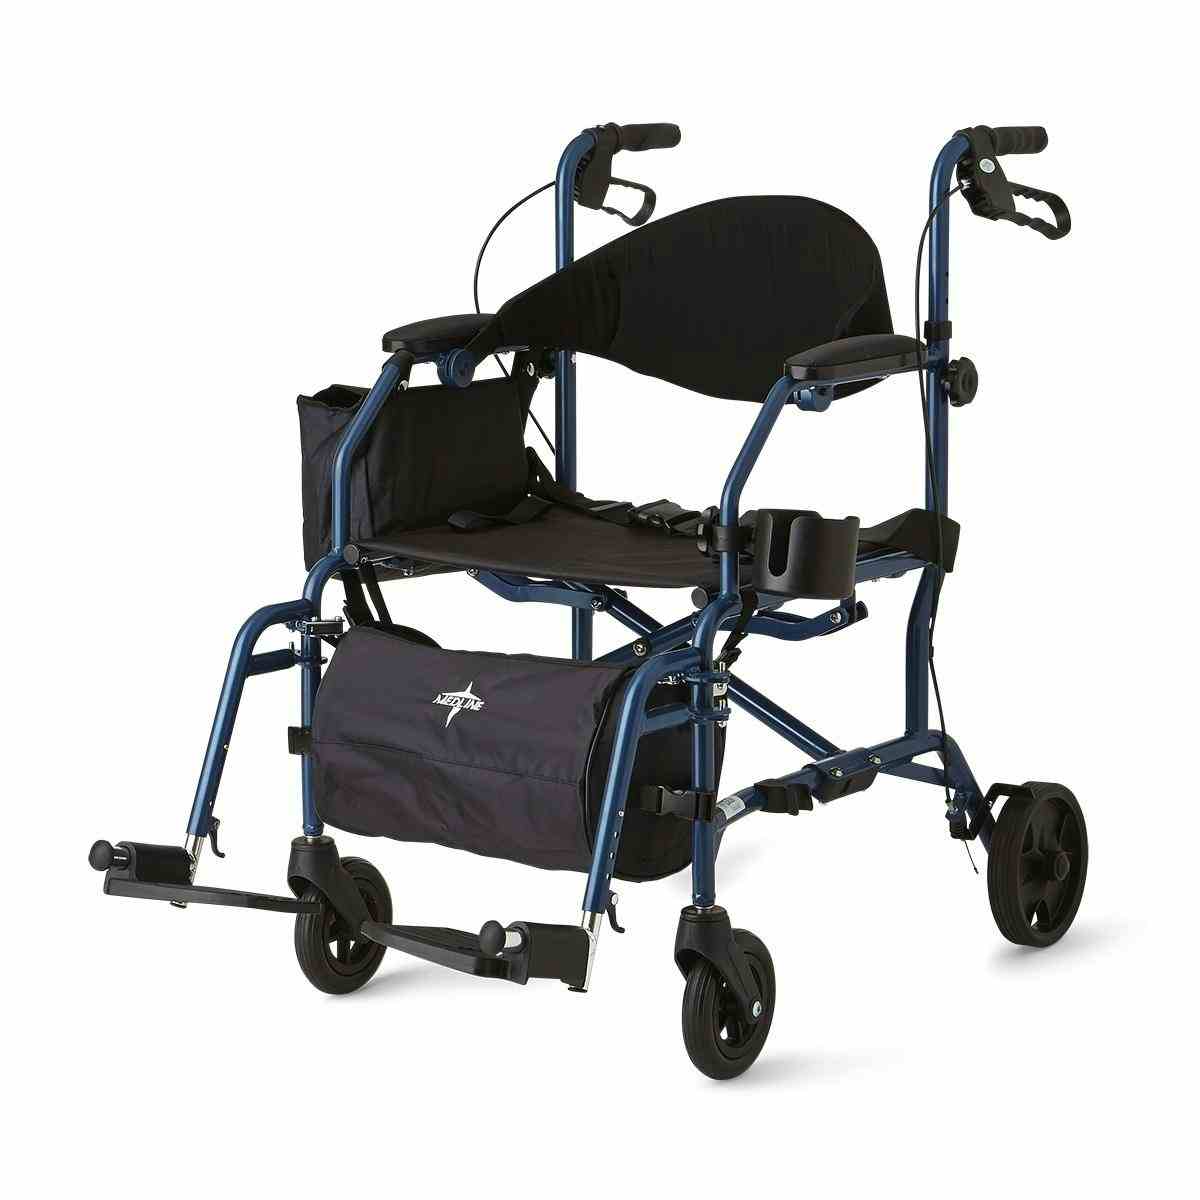 Medline Translator Combination Transport Chair and Rollator, Swing-Away Footrests, 8", MDS808200TR, Blue - 1 Each